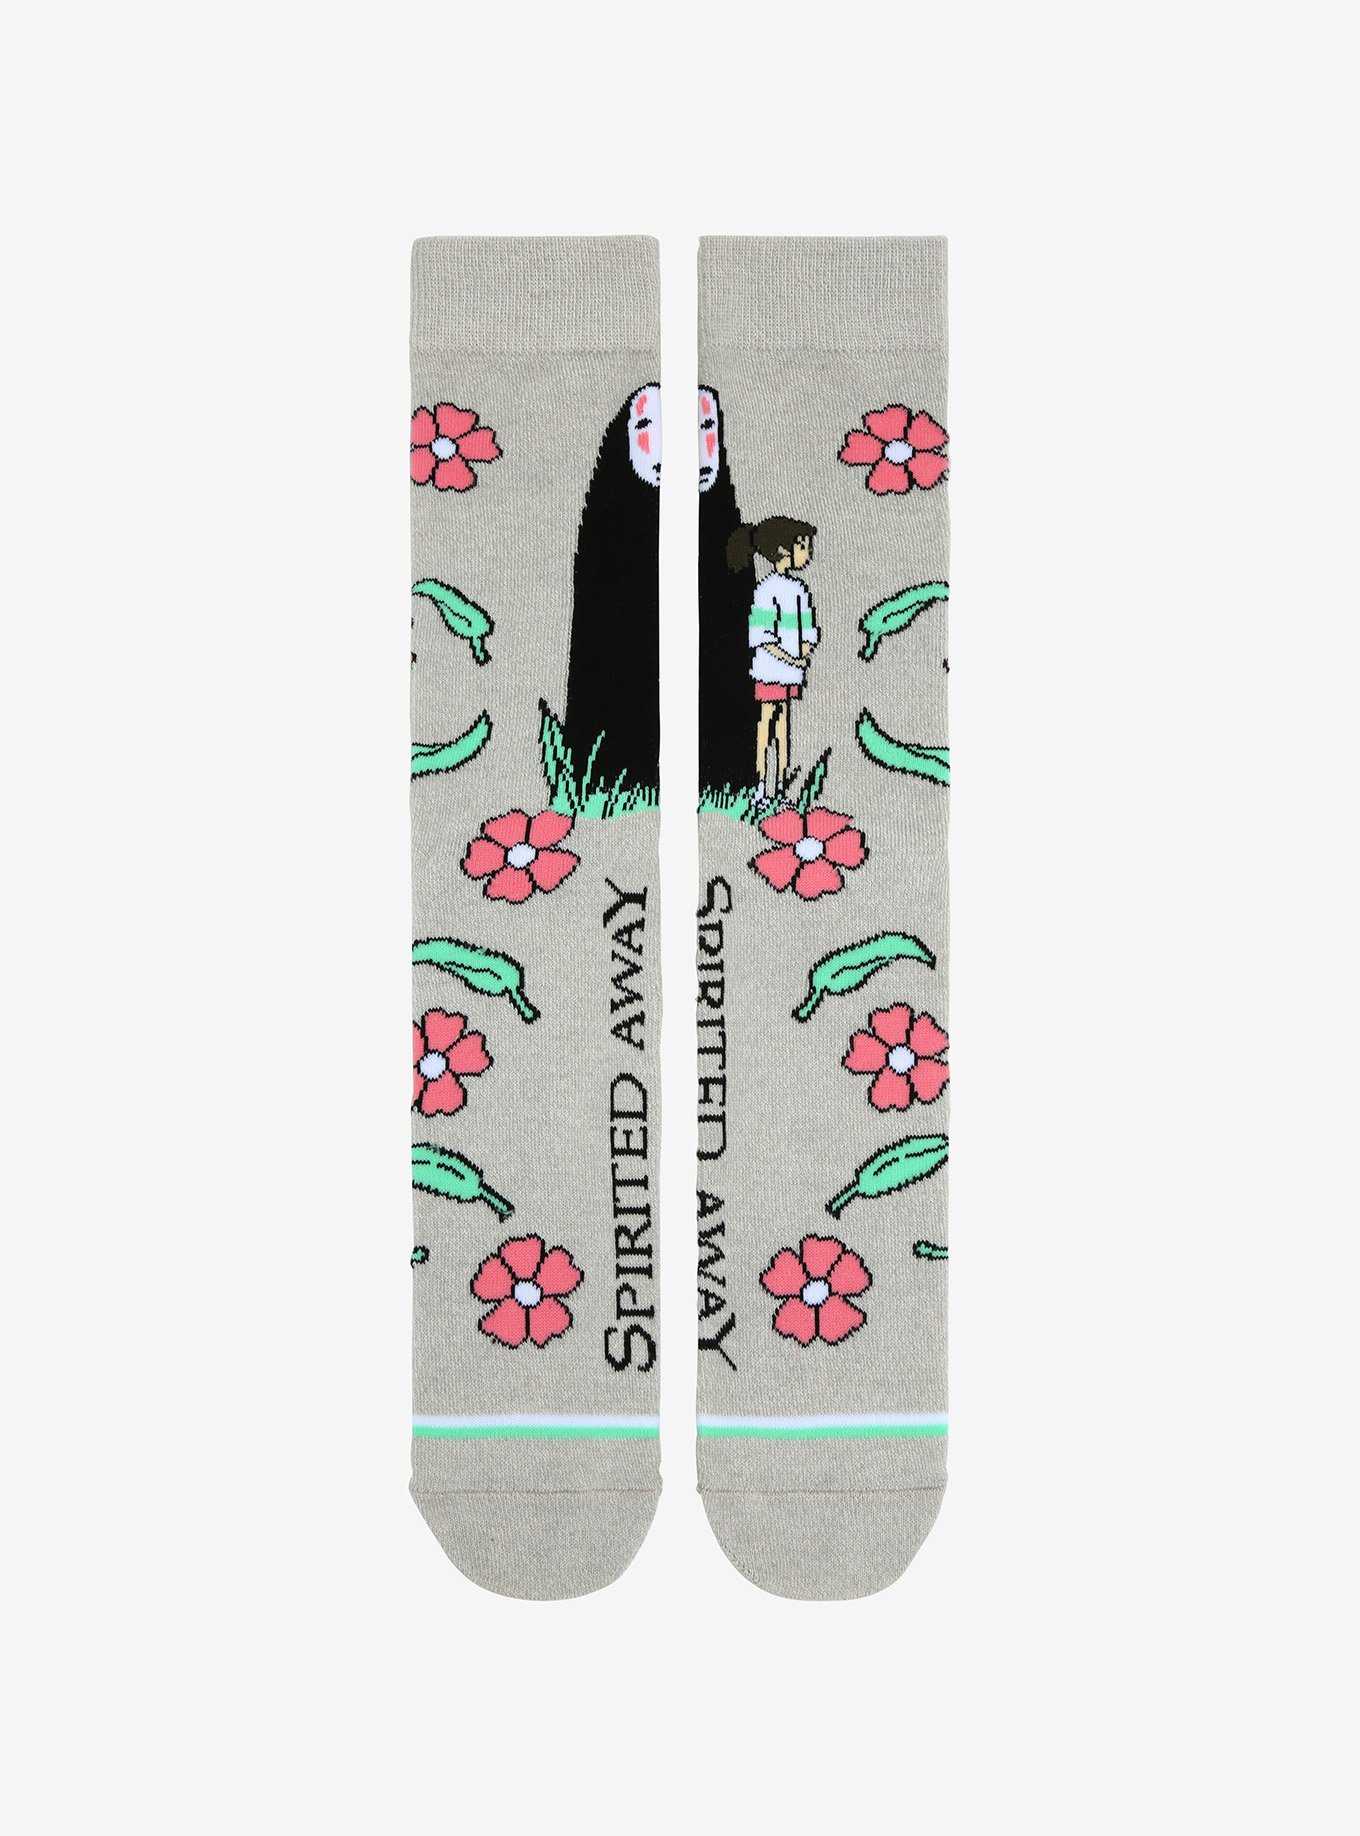 Studio Ghibli Spirited Away No-Face & Chihiro Floral Crew Socks - BoxLunch Exclusive, , hi-res